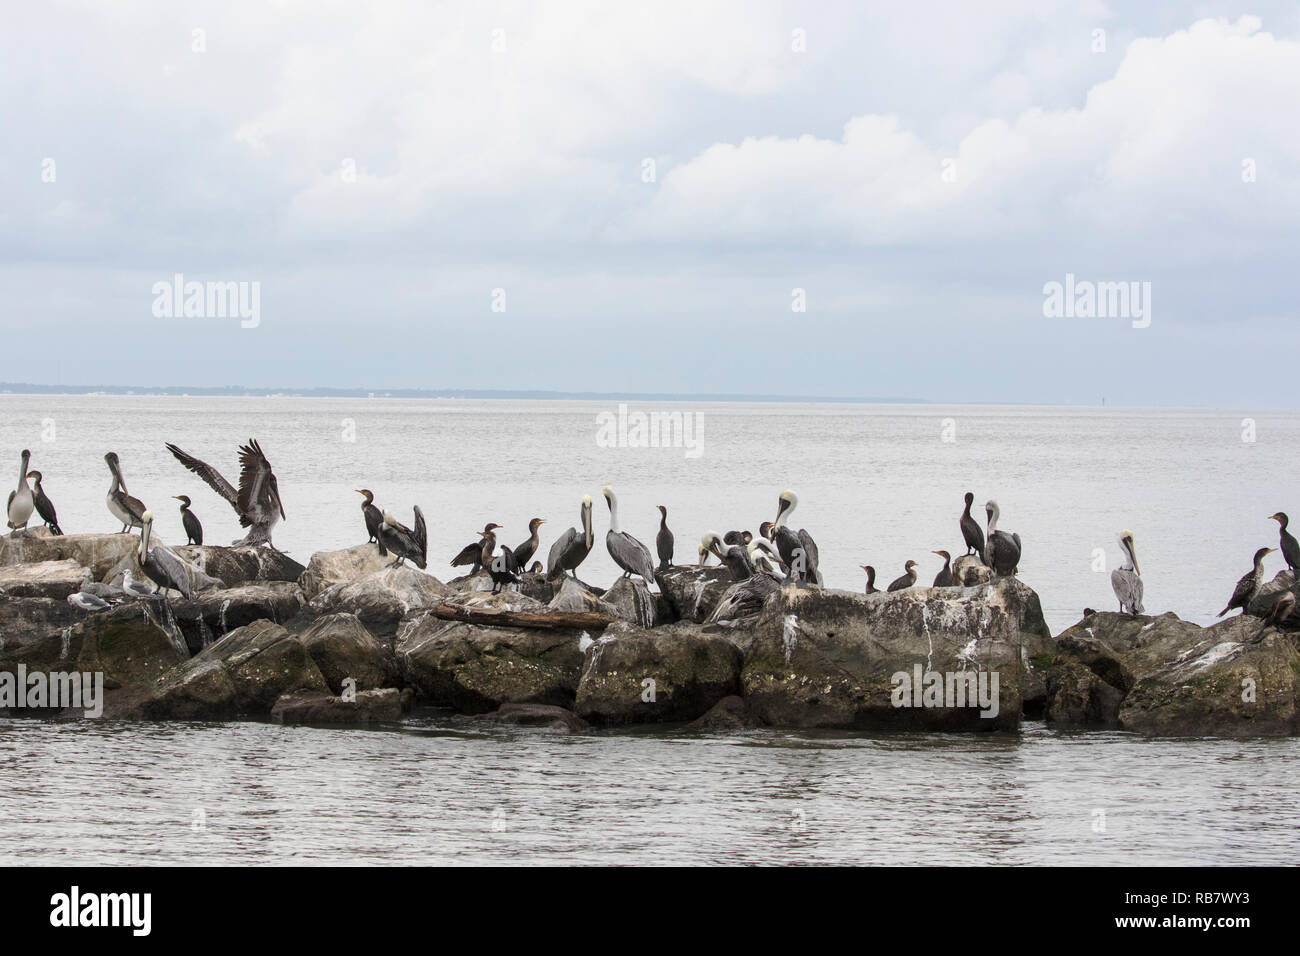 Brown pelicans and cormorants resting on rocks in the water Stock Photo